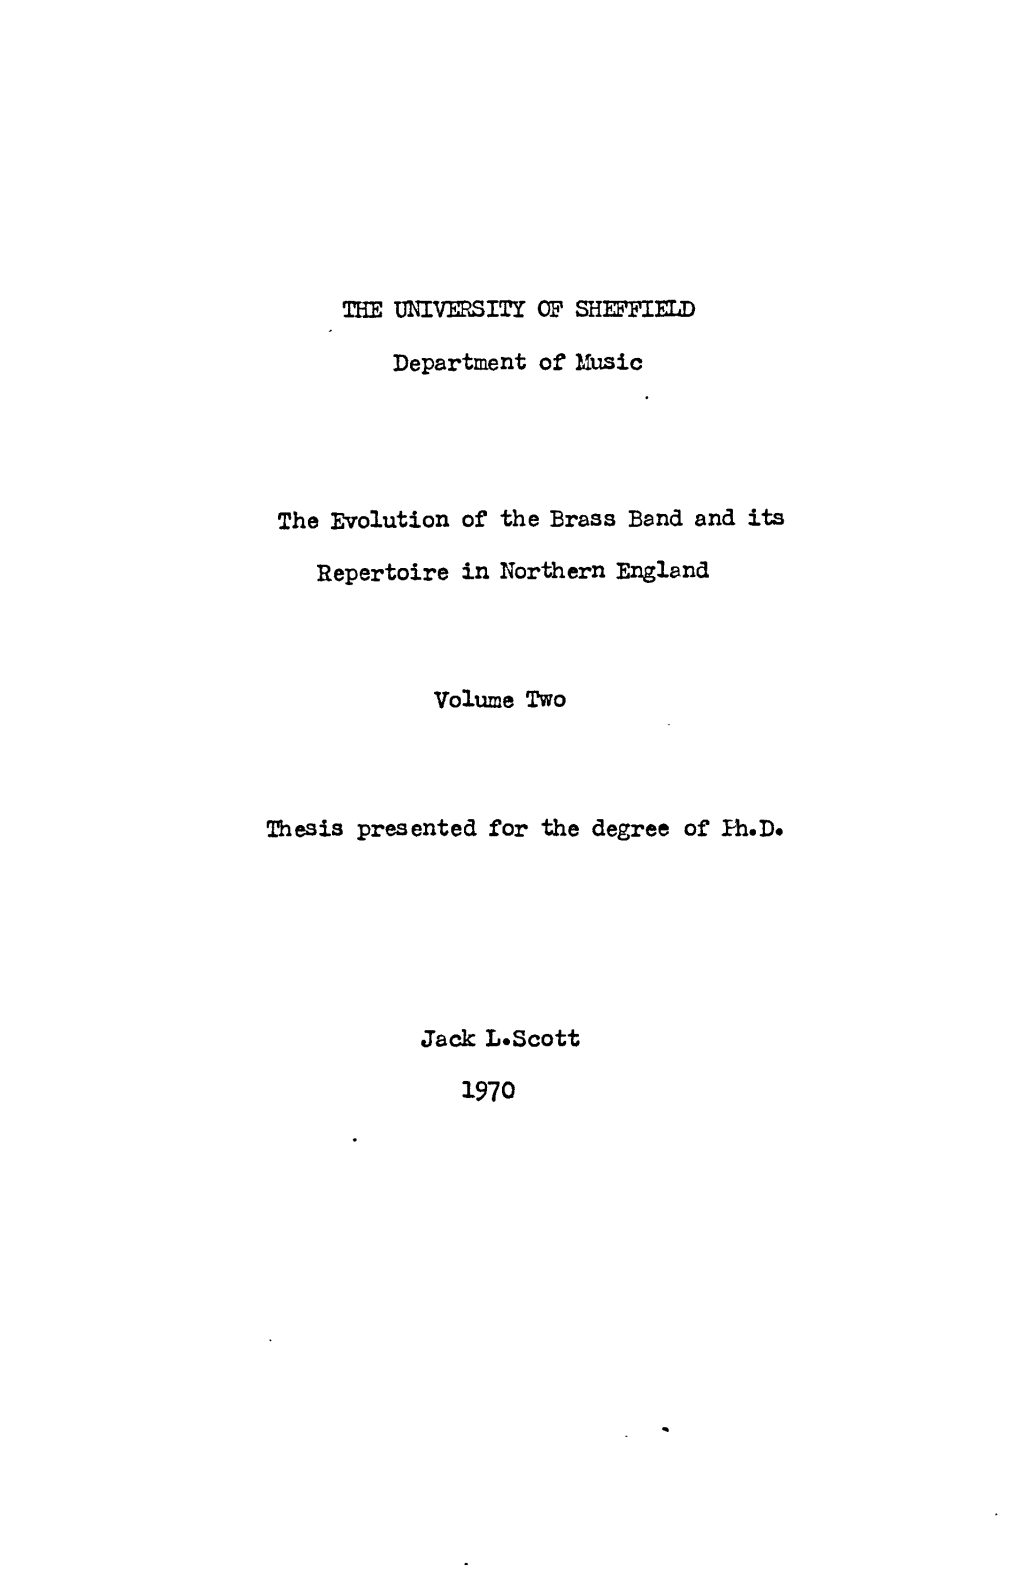 Repertoire in Northern England Volume TWO Thesis Presented for the Degree of A. De Jack L-Scott